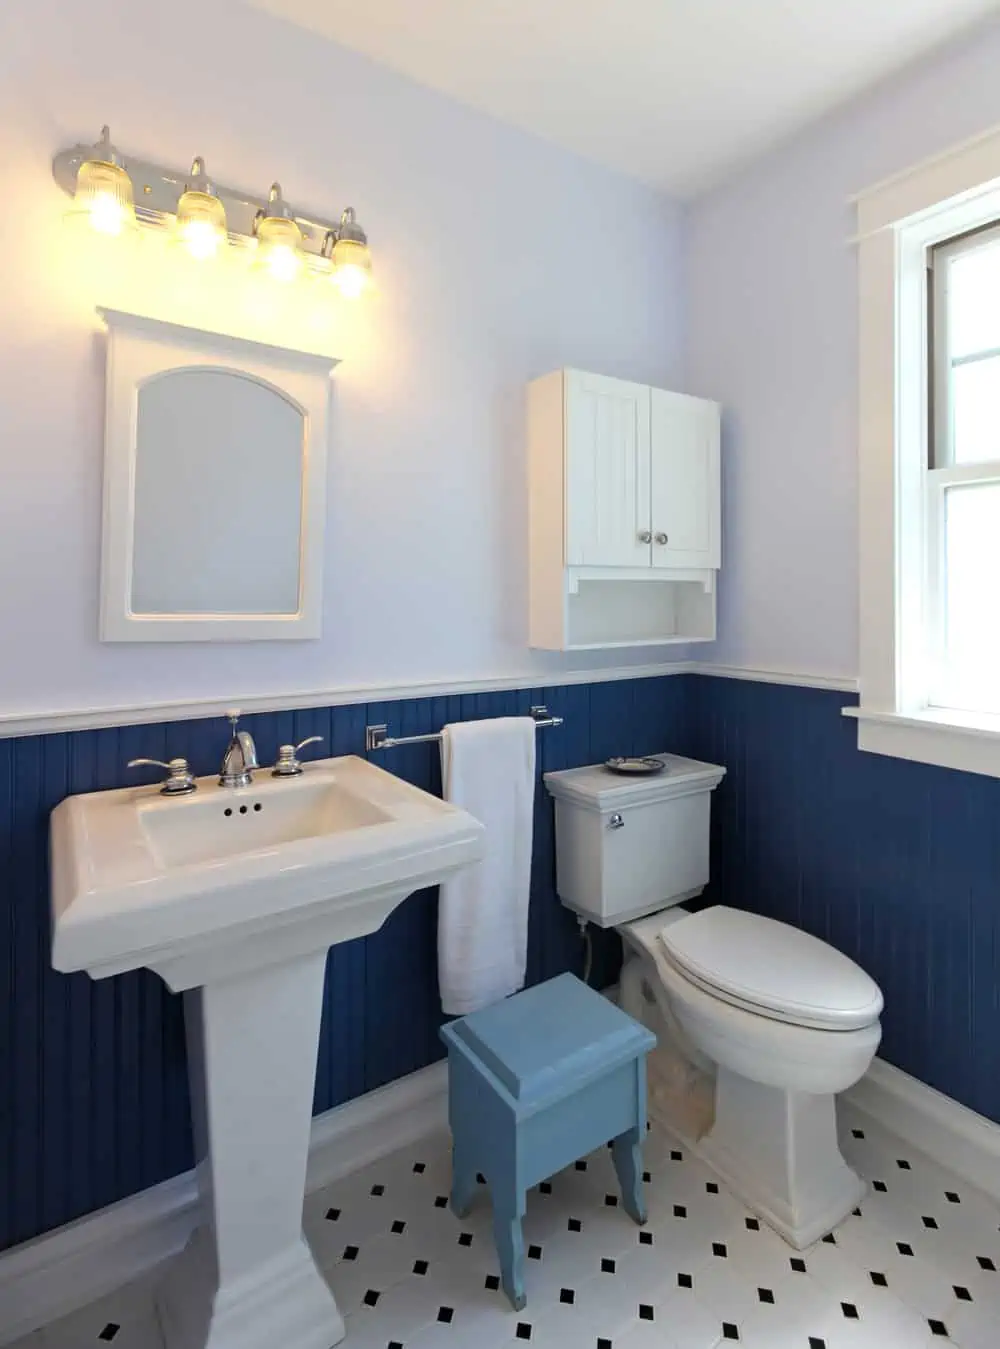 Bathroom with sink and toilet with blue walls and tile floor.